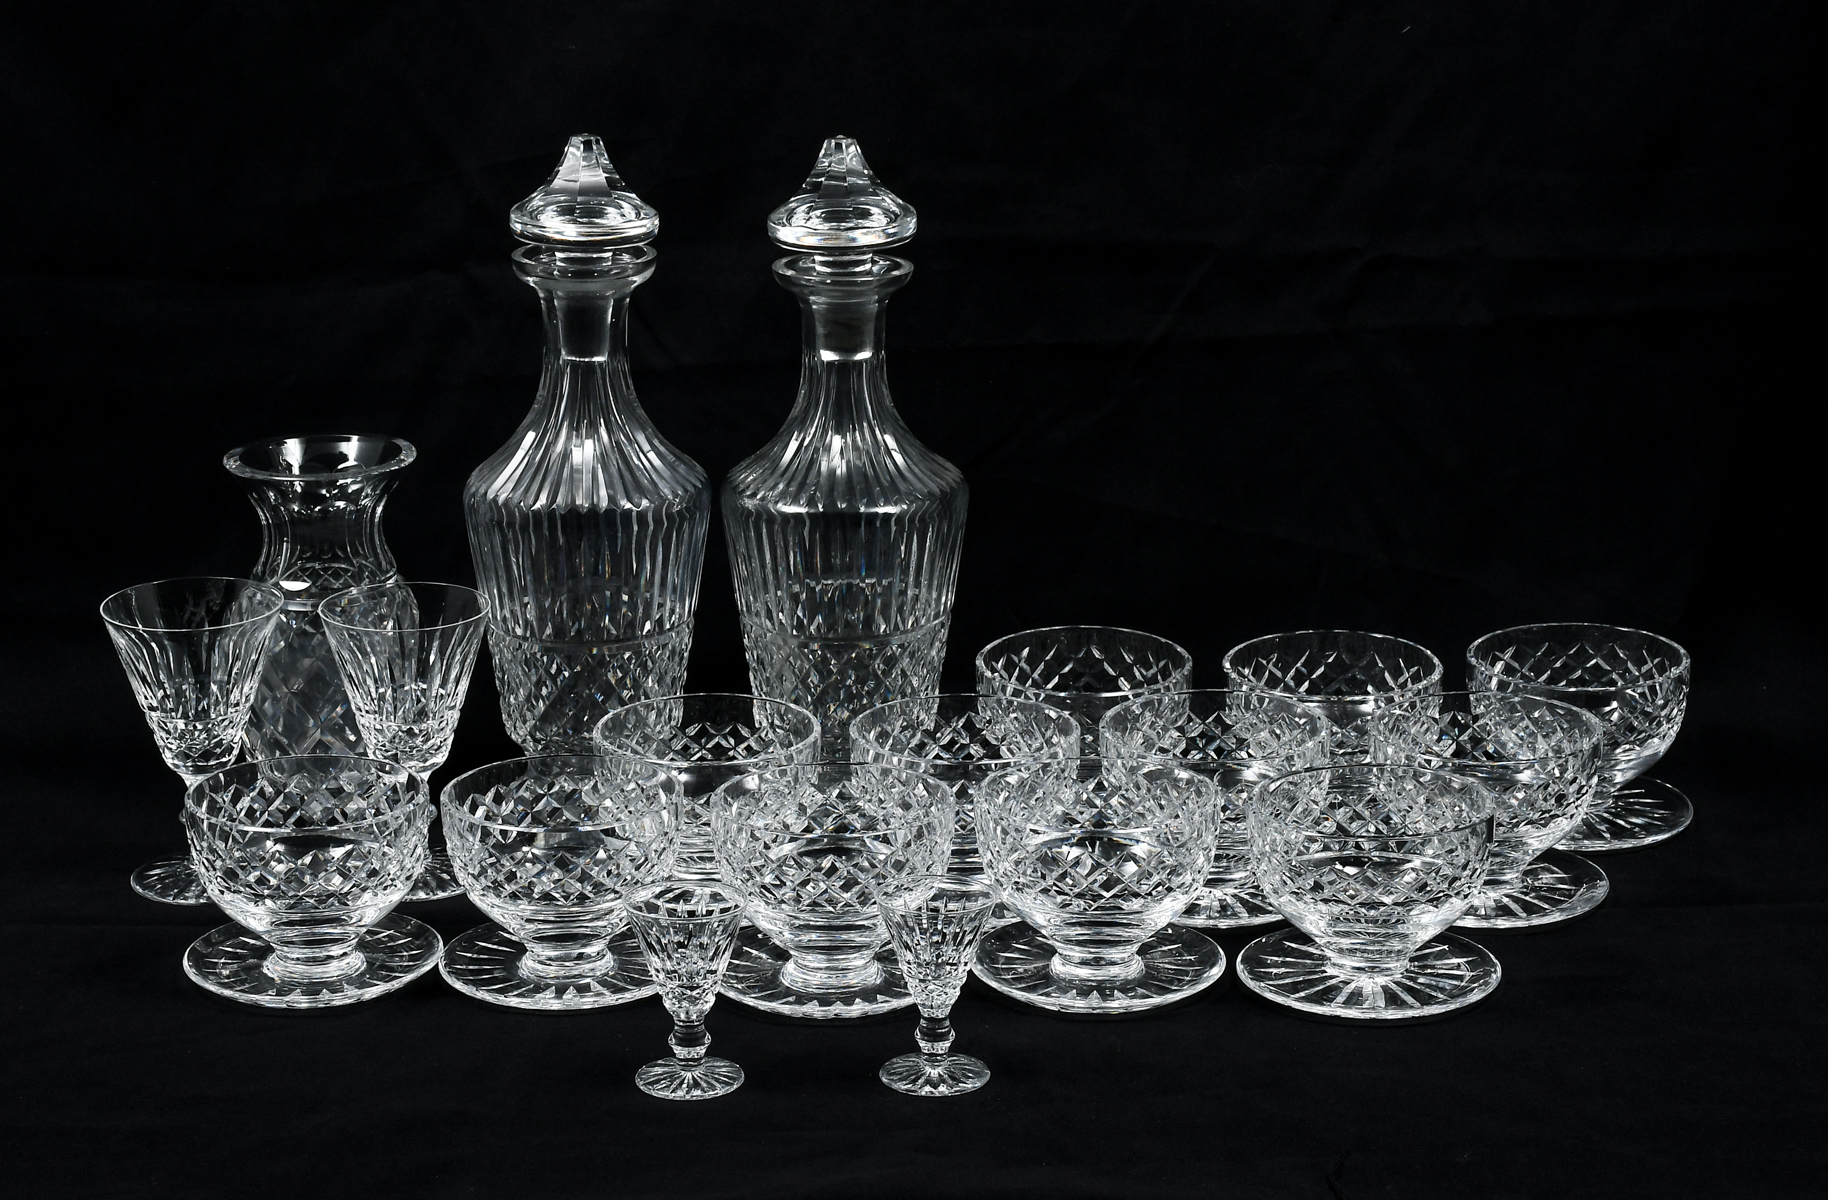 19-PC. WATERFORD MAEVE CRYSTAL COLLECTION: